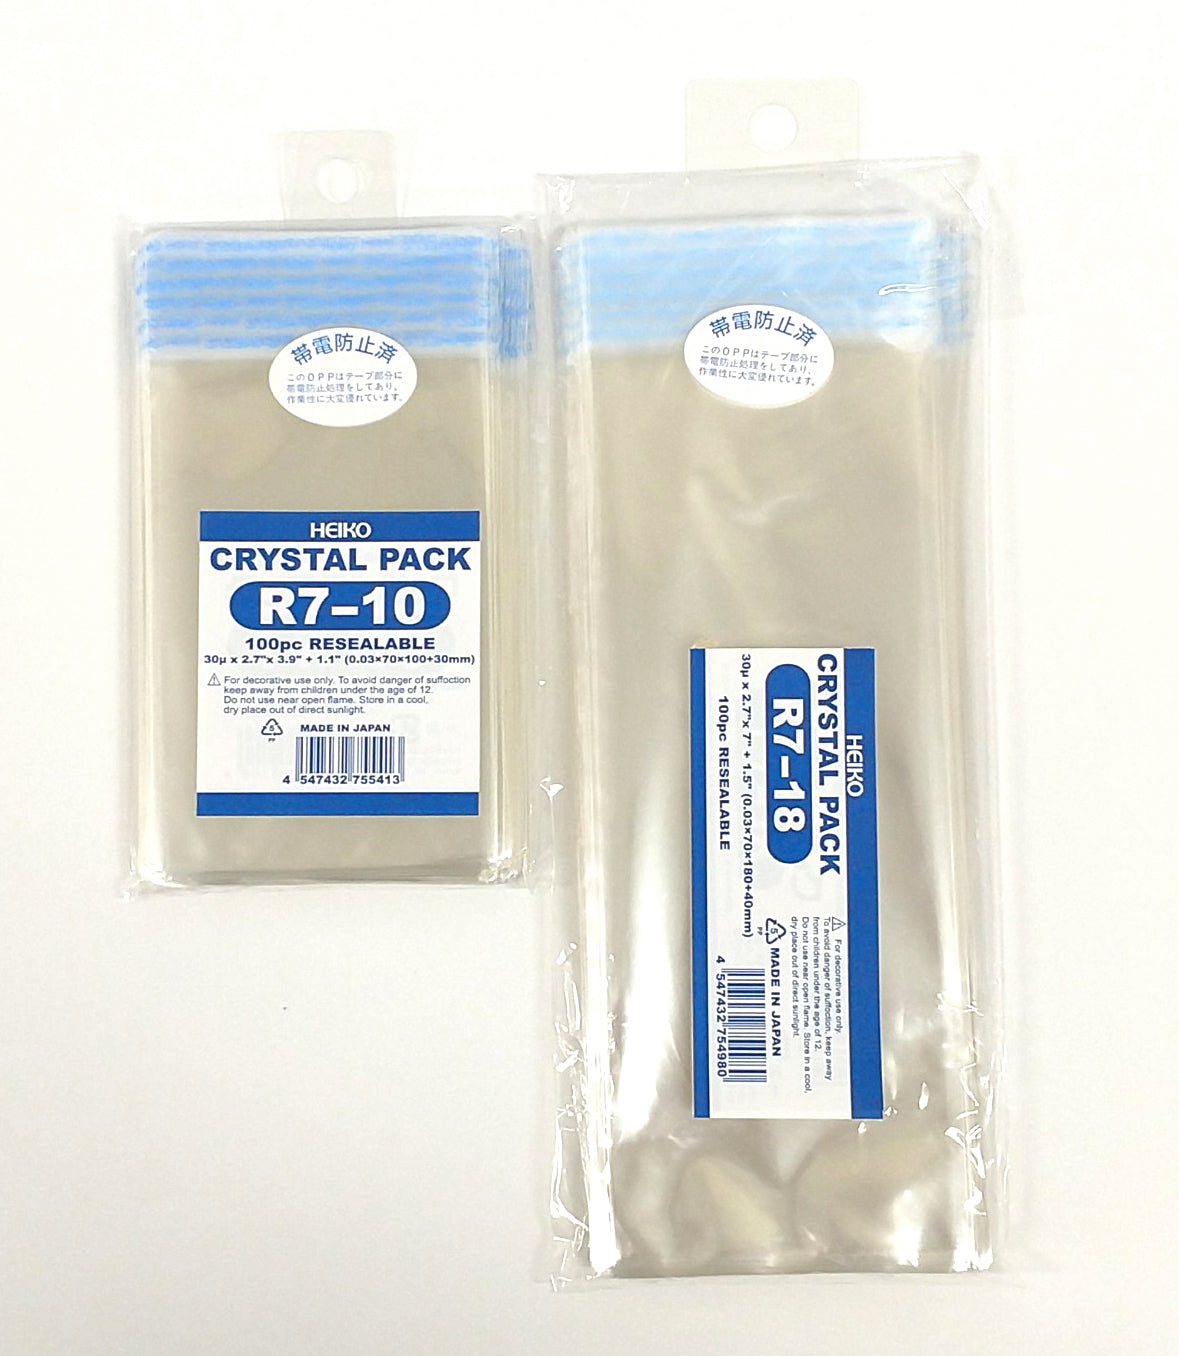 Crystal Pack Resealable 7 series